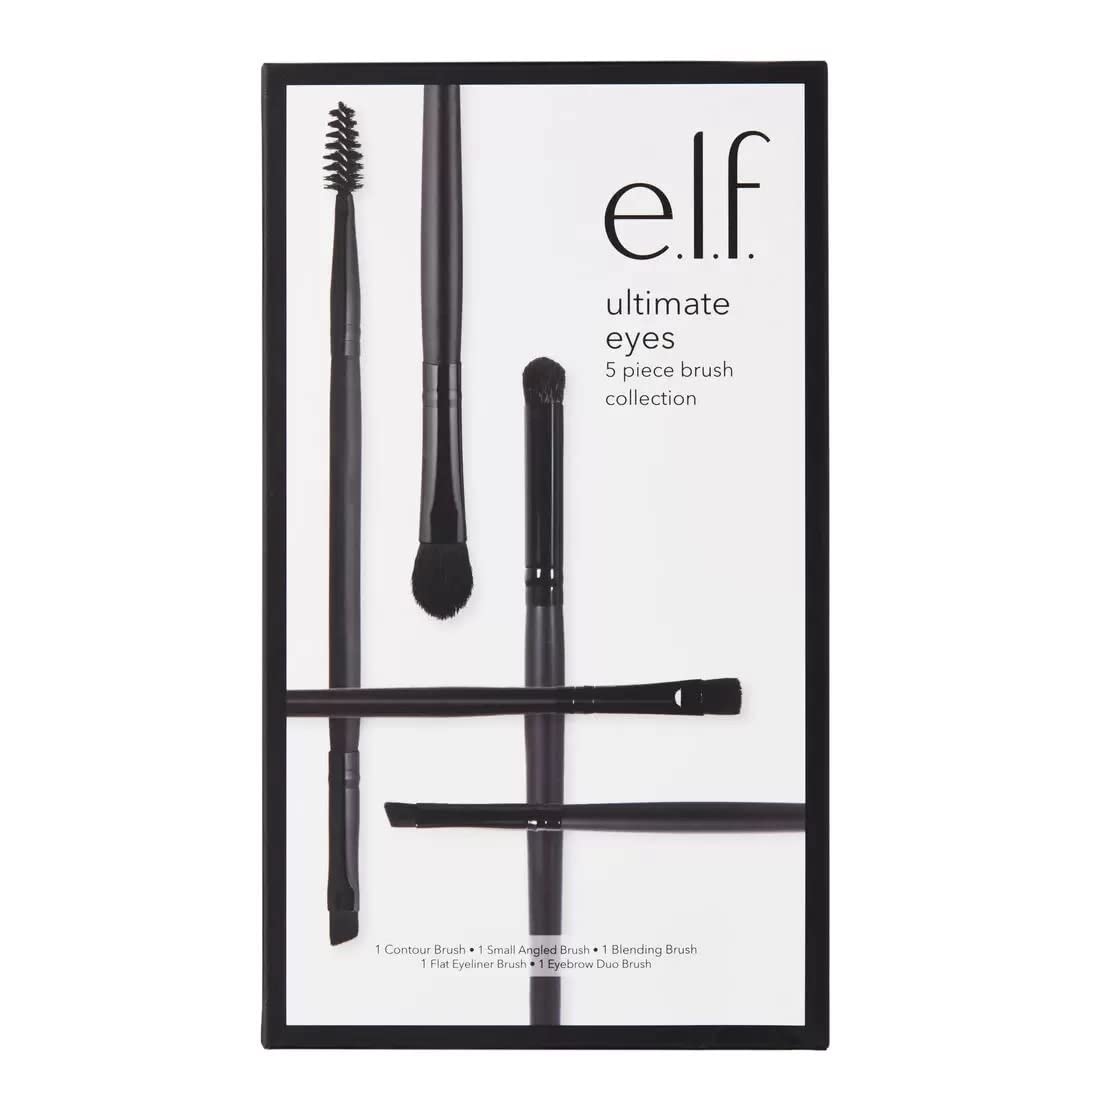 E.L.F. Ultimate Eyes Kit, 5 Piece Brush Collection